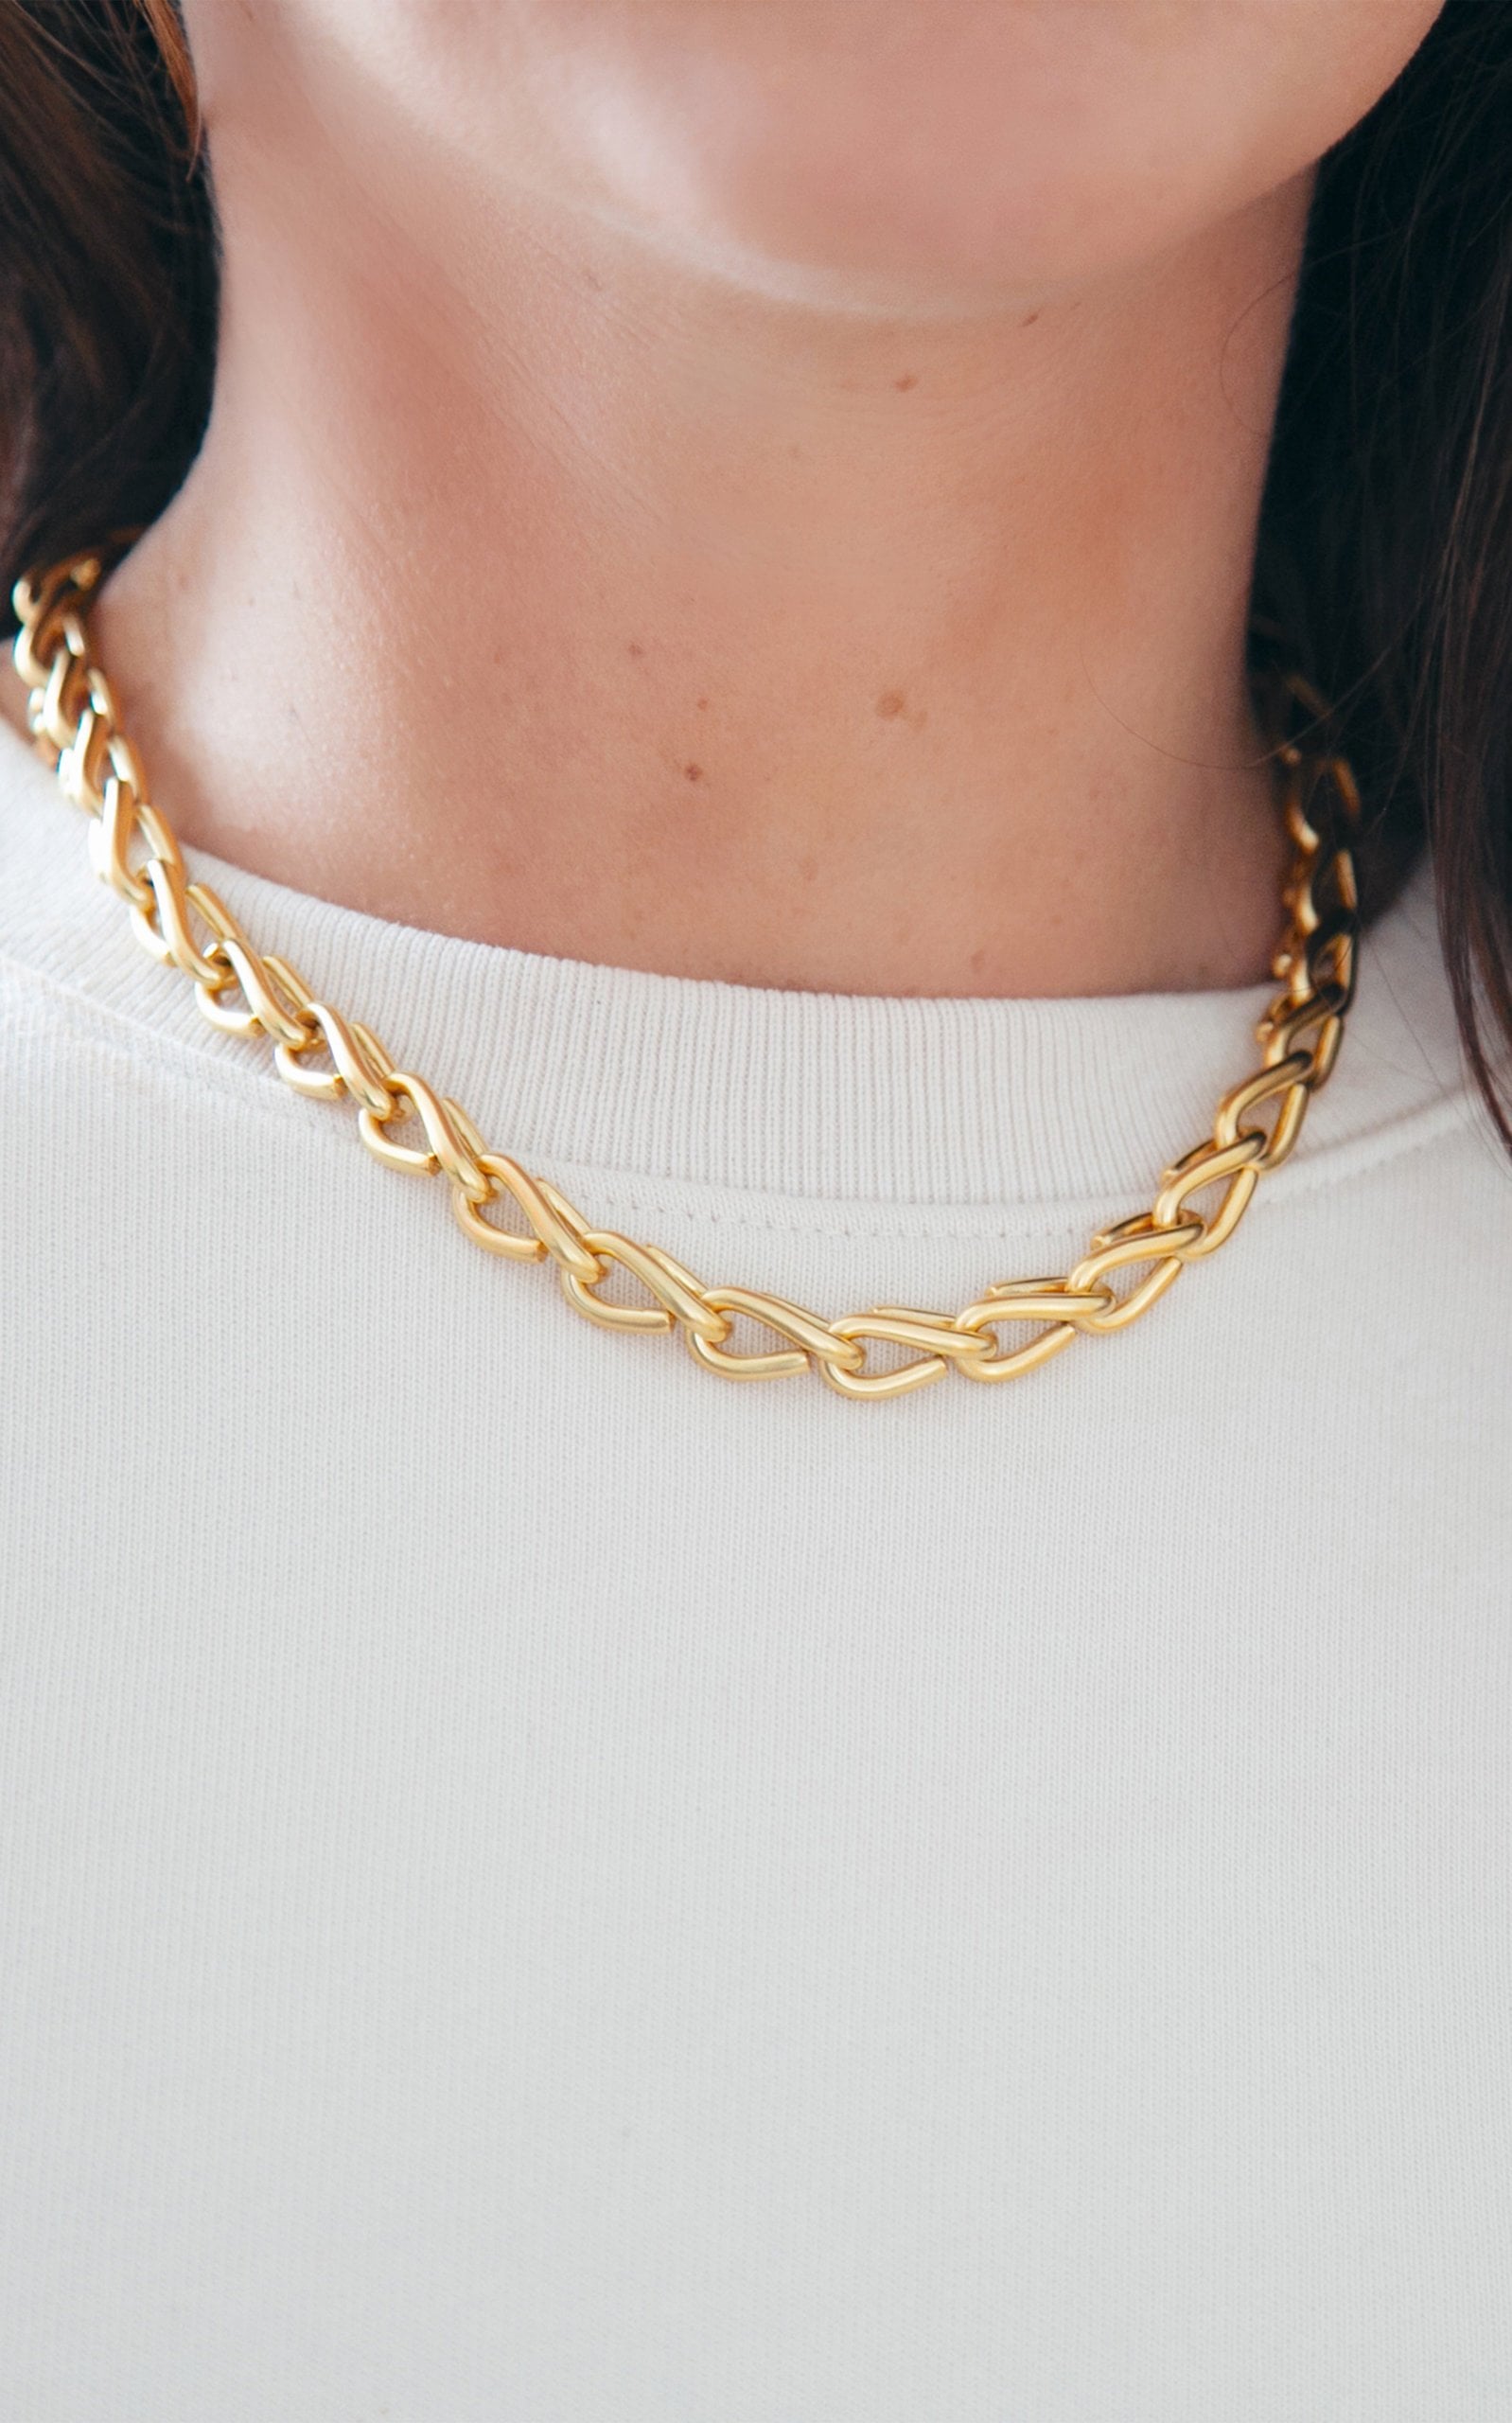 A Statement Necklace: Brinker & Eliza Harley 24k Gold-Plated Chain Necklace